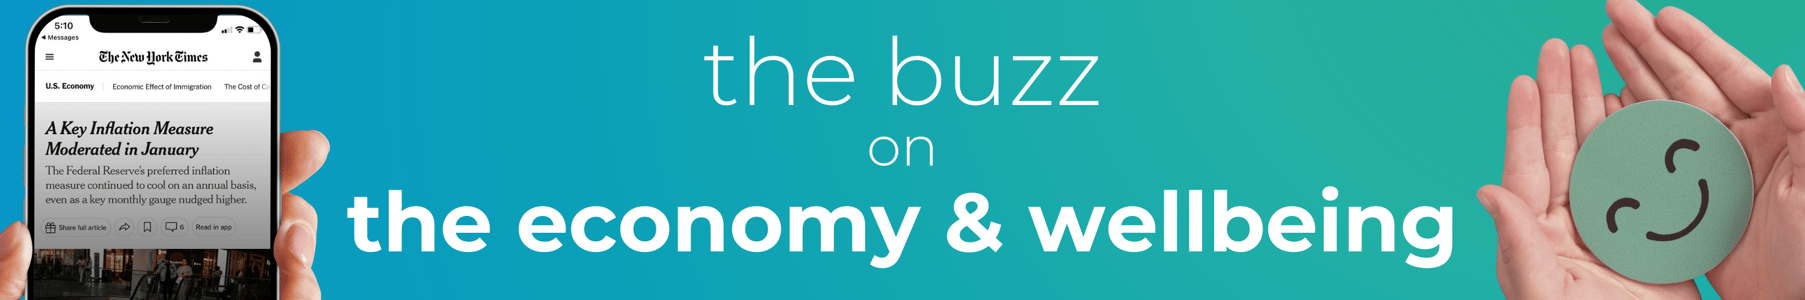 the buzz on the economy and wellbeing page header 2